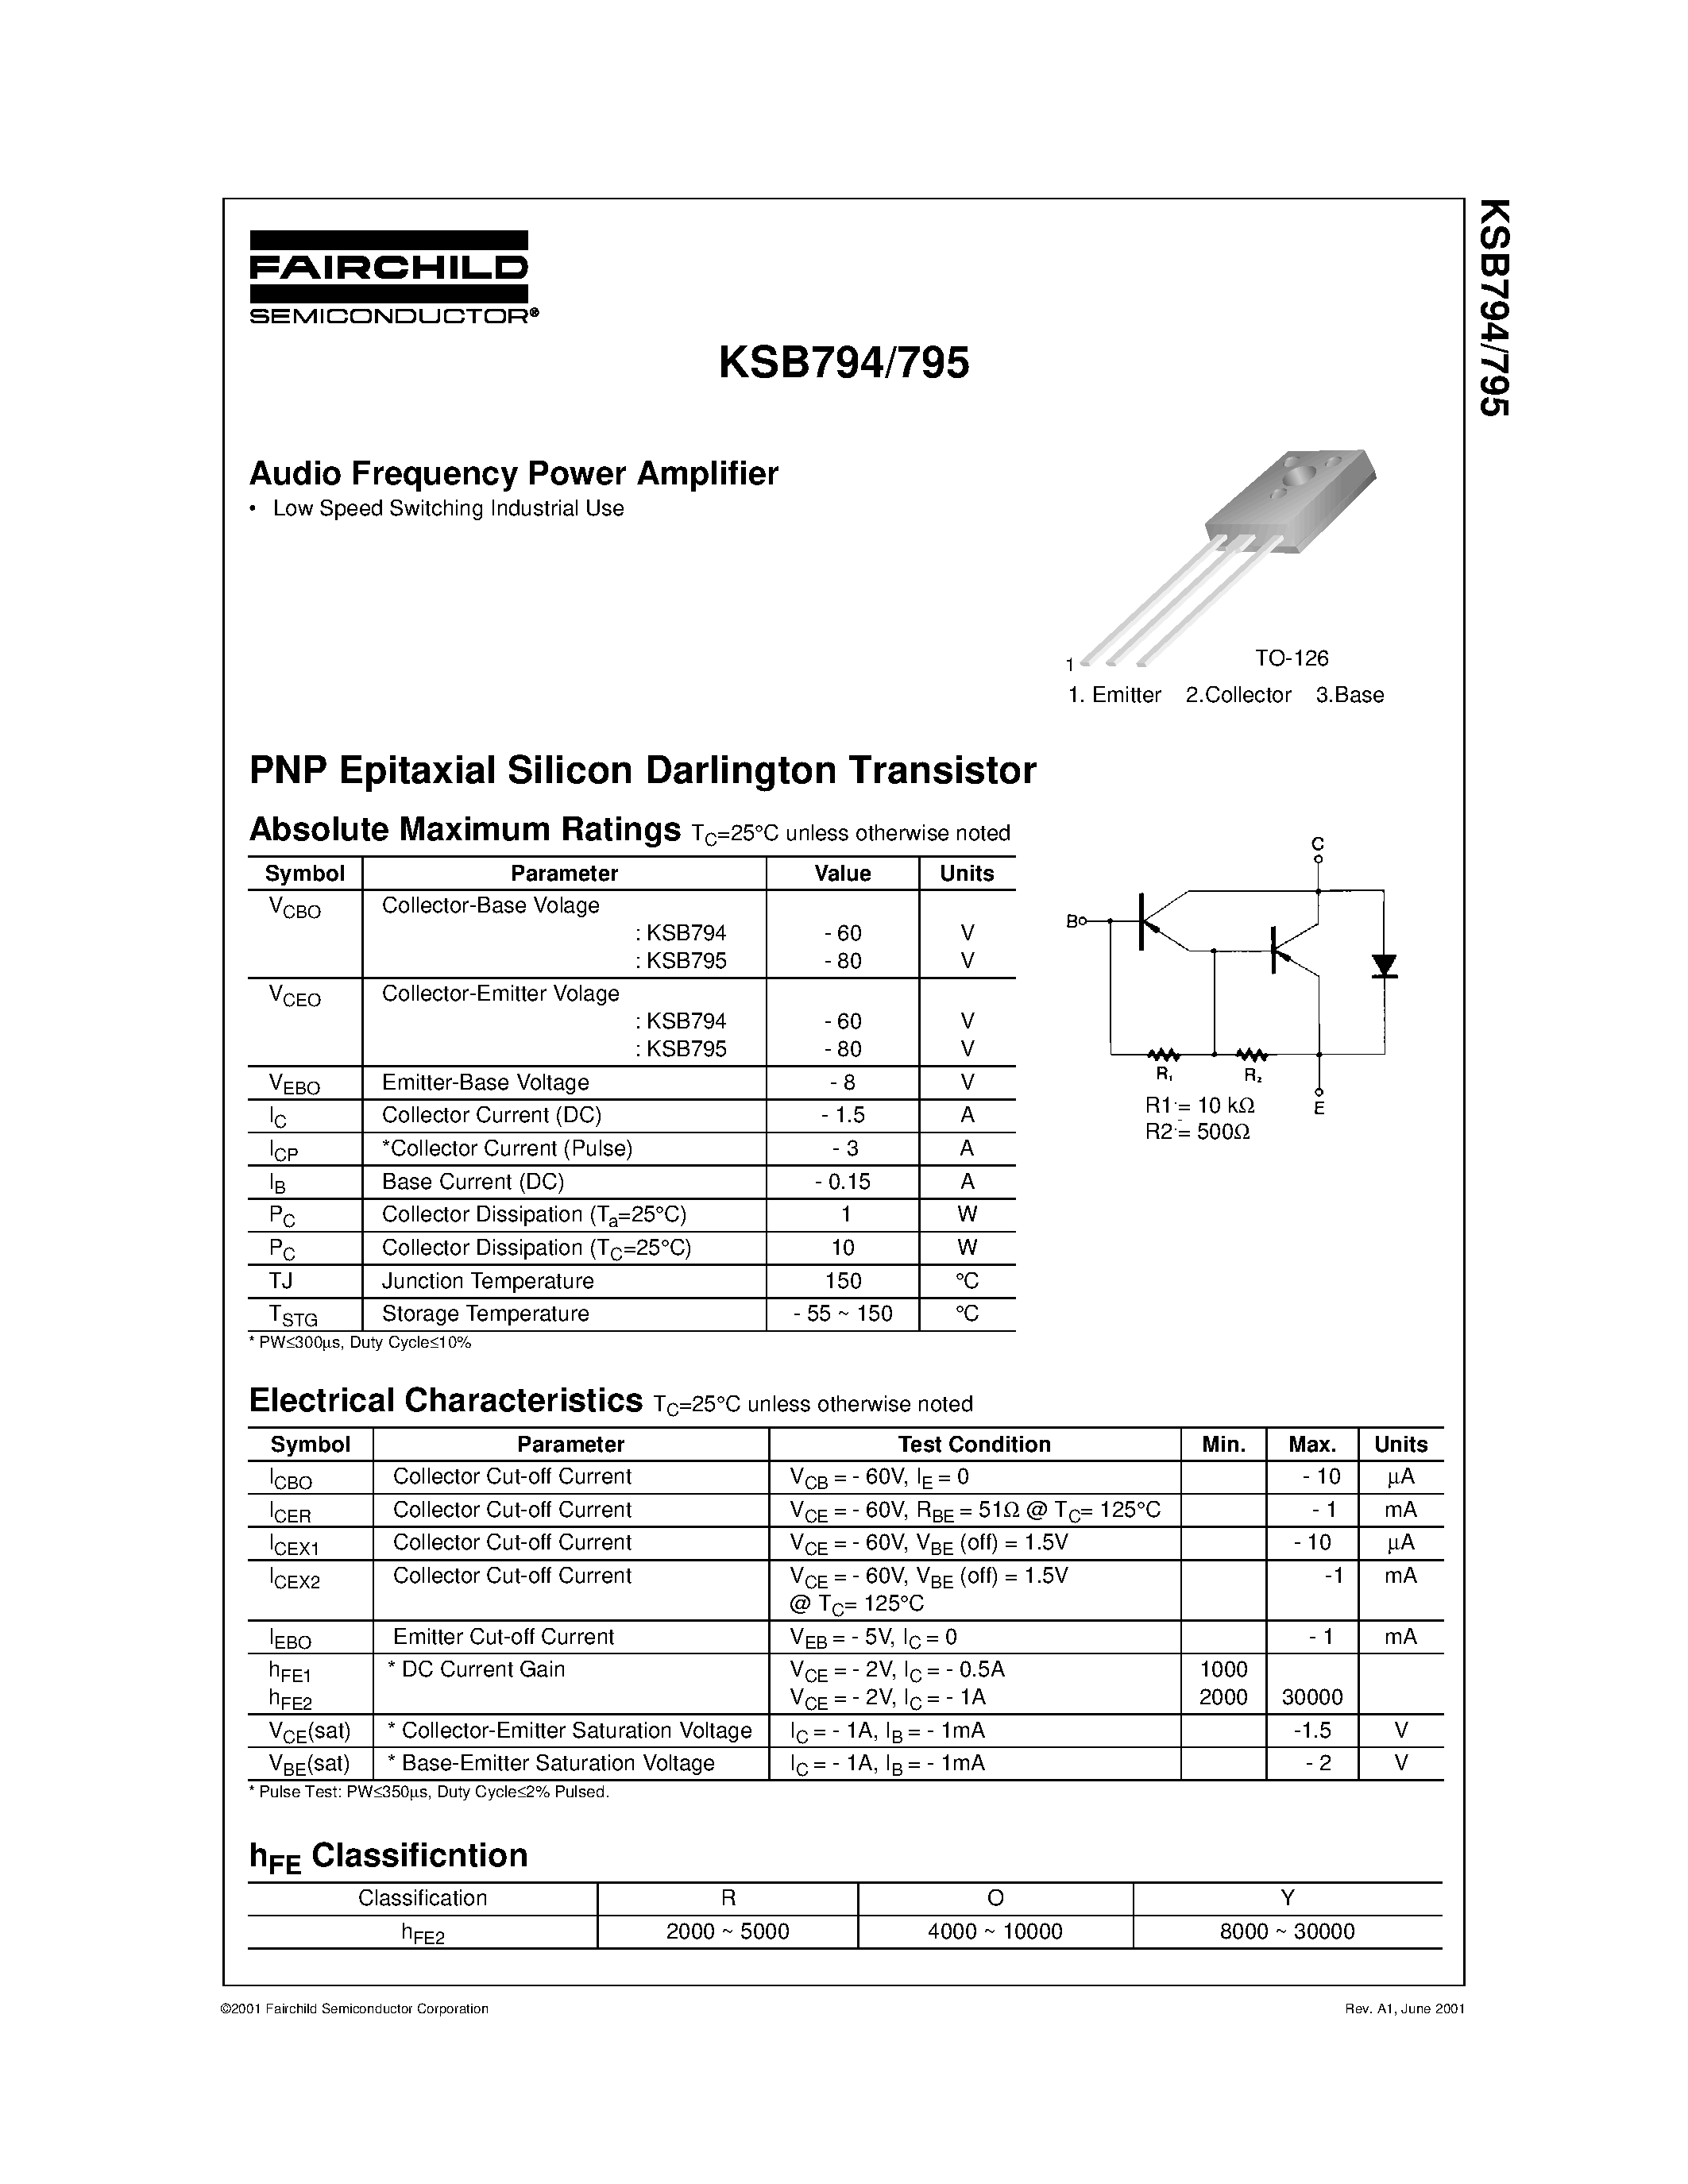 Datasheet KSB795 - Audio Frequency Power Amplifier page 1